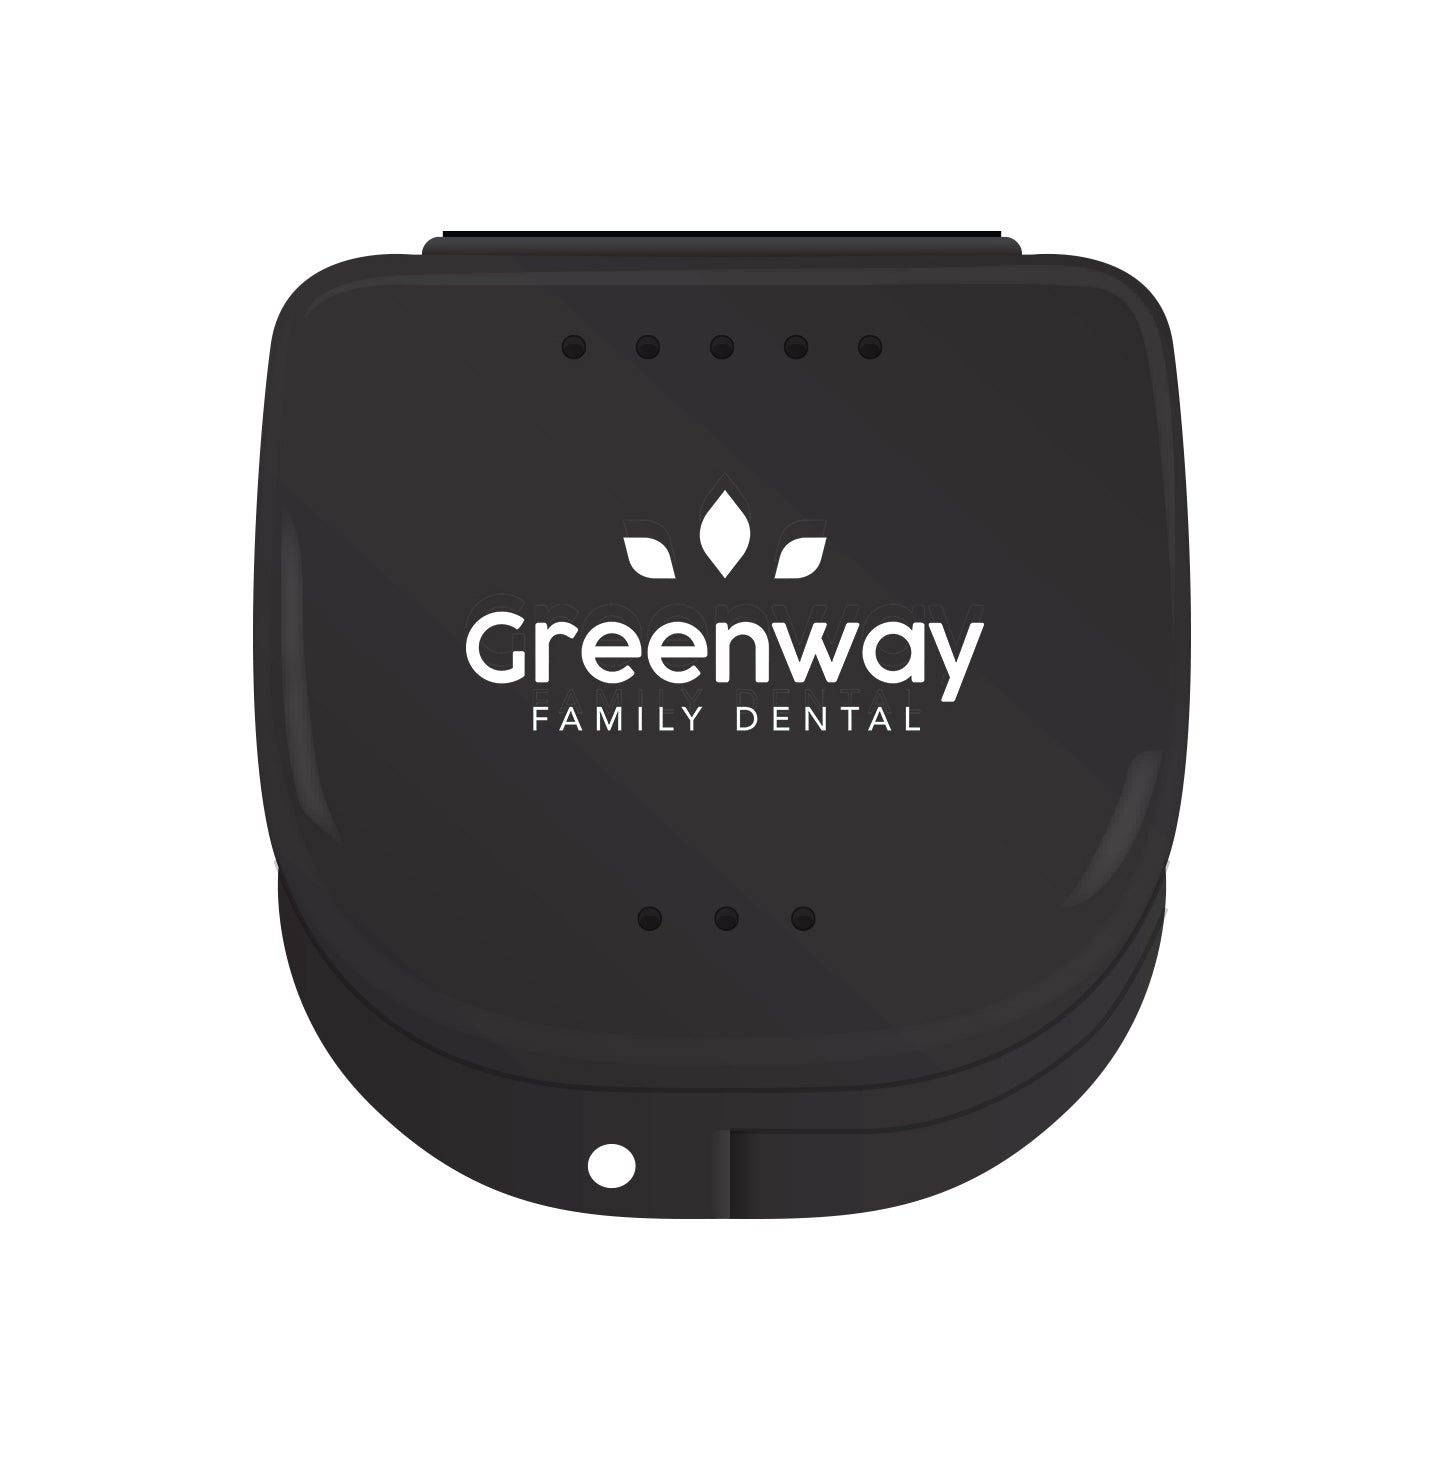 Greenway Family Dental Whitening Cases